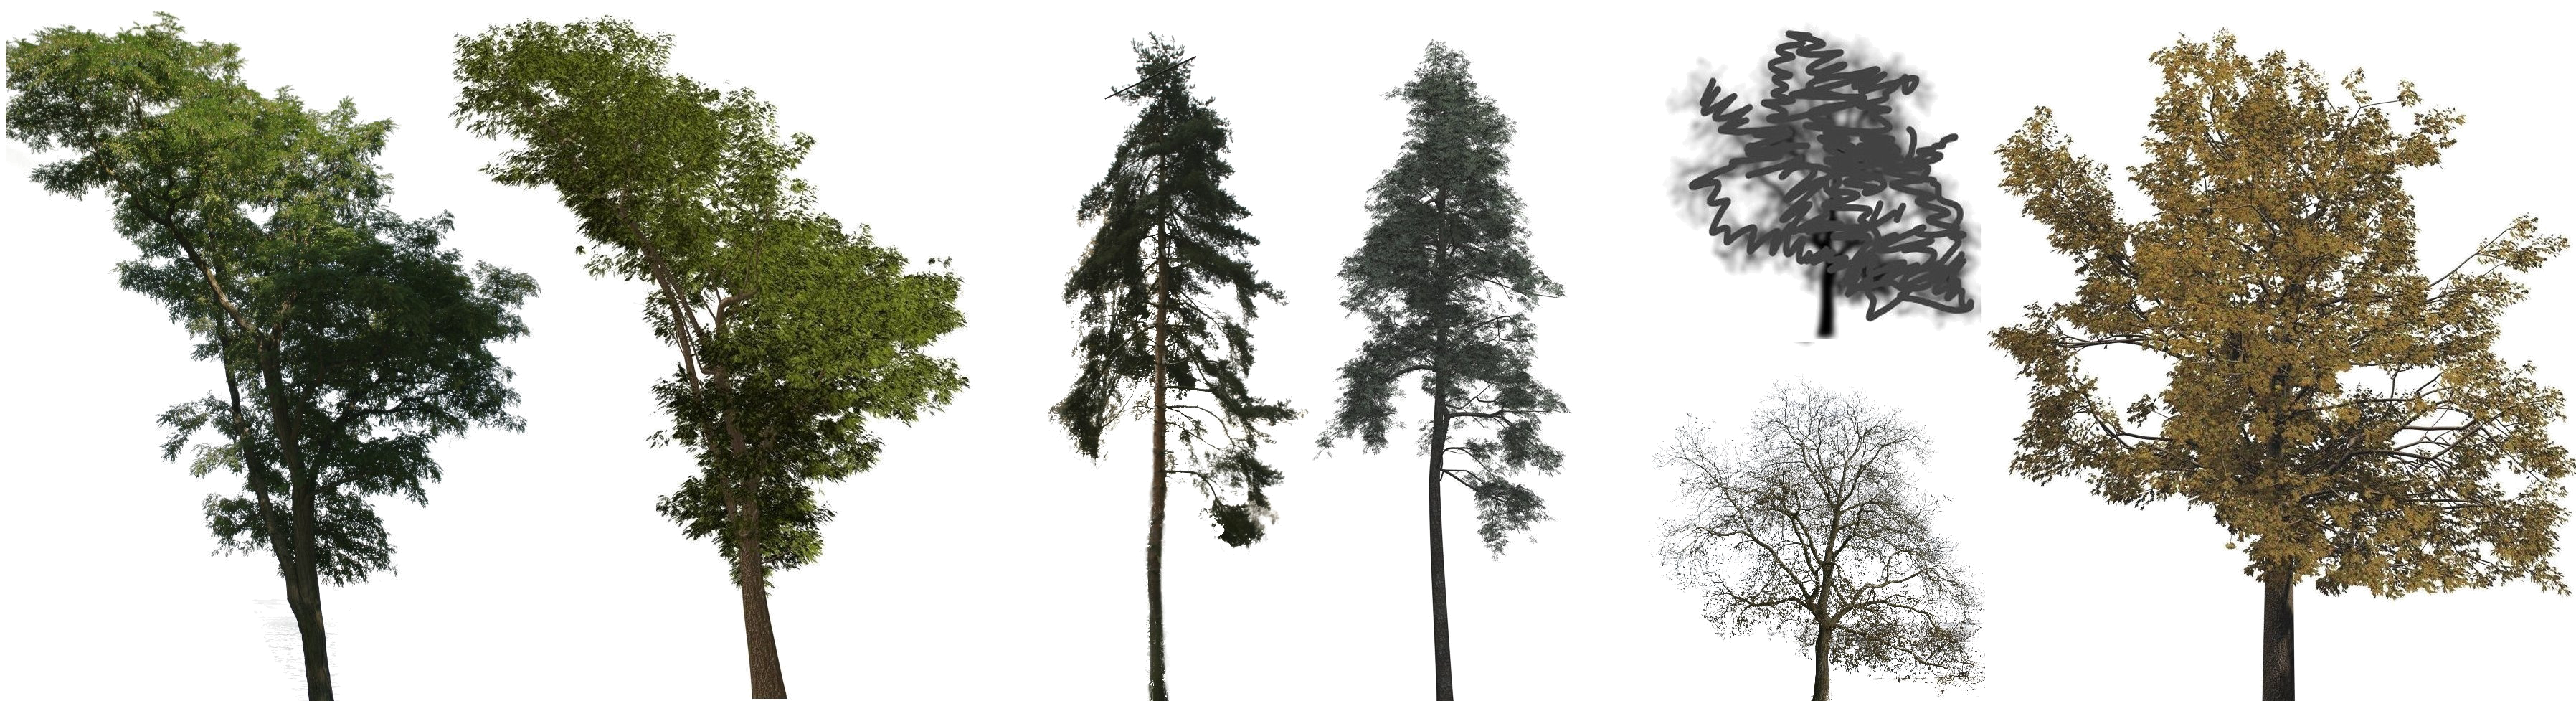 Teaser of Approximate Image-based Tree-modeling Using Particle Flows